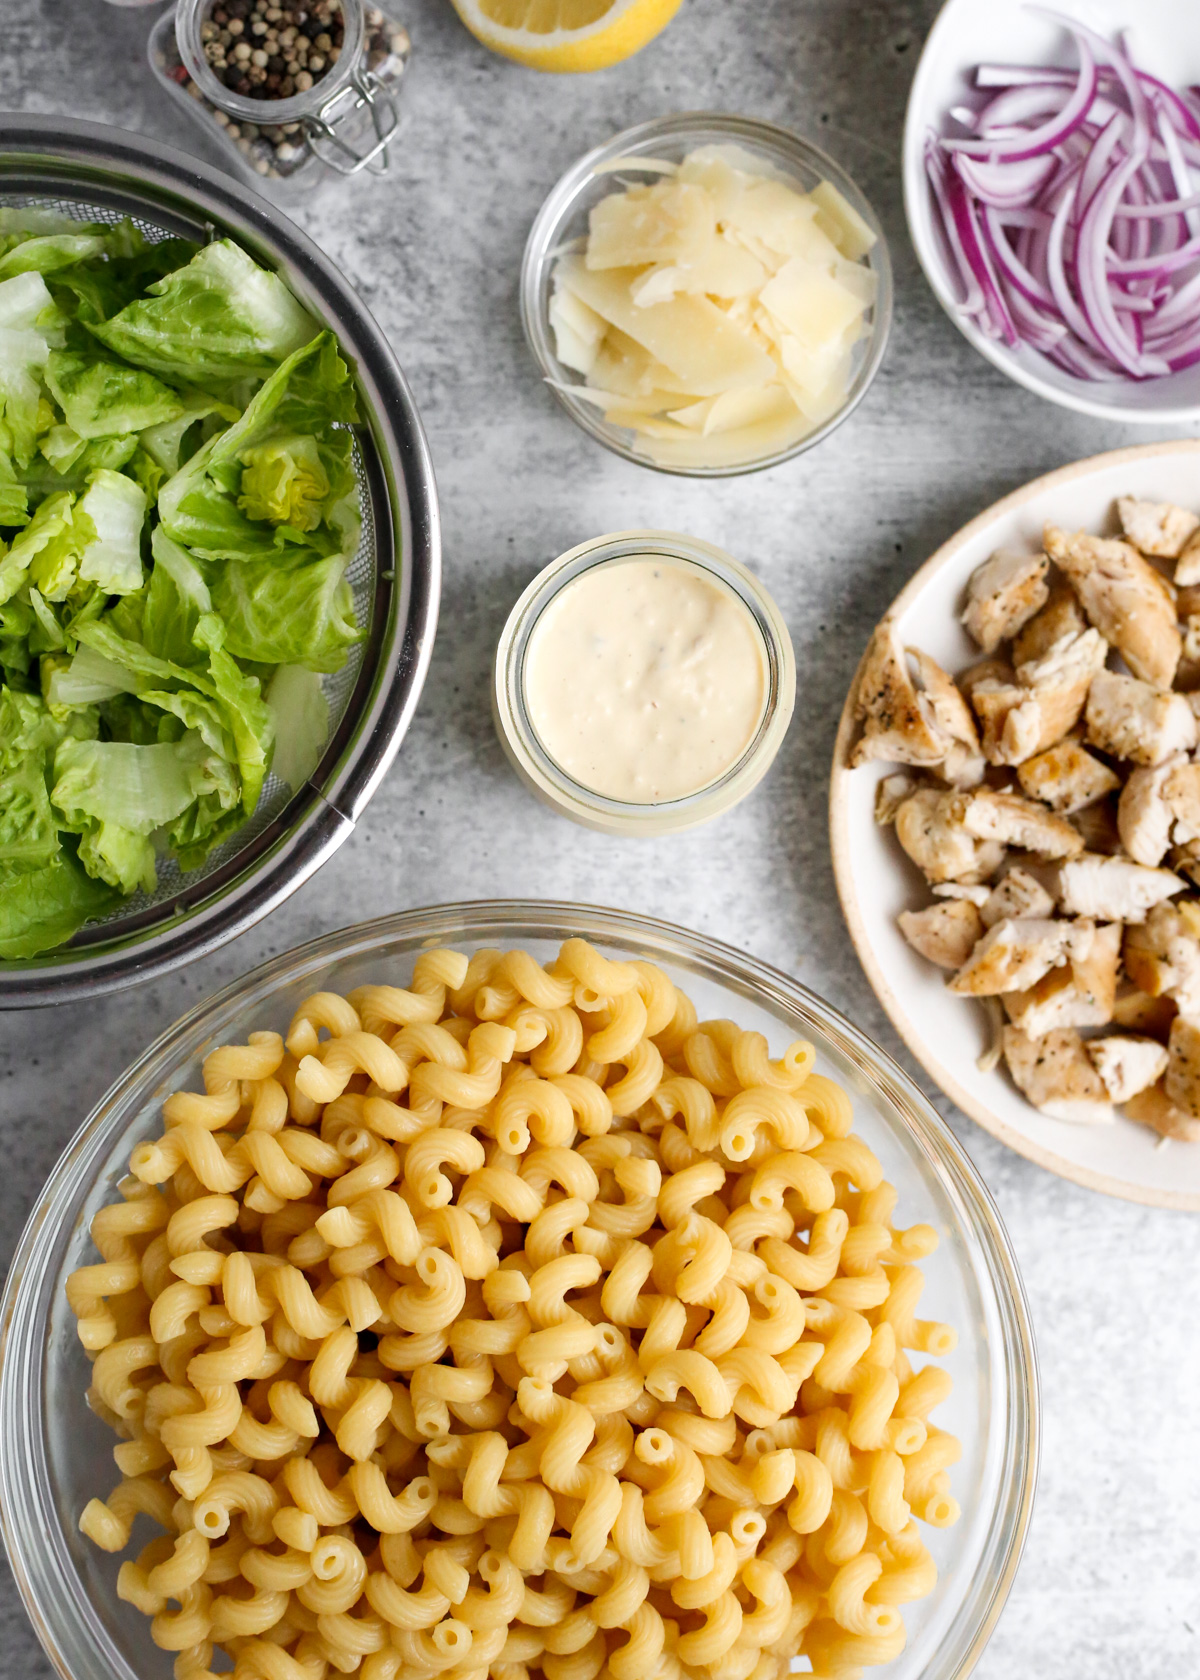 Flatlay style image of the ingredients needed to make a chicken caesar pasta salad, including crispy romaine lettuce, parmesan cheese, slide red onions, a creamy Caesar Salad dressing, seasoned chicken, and cooked pasta